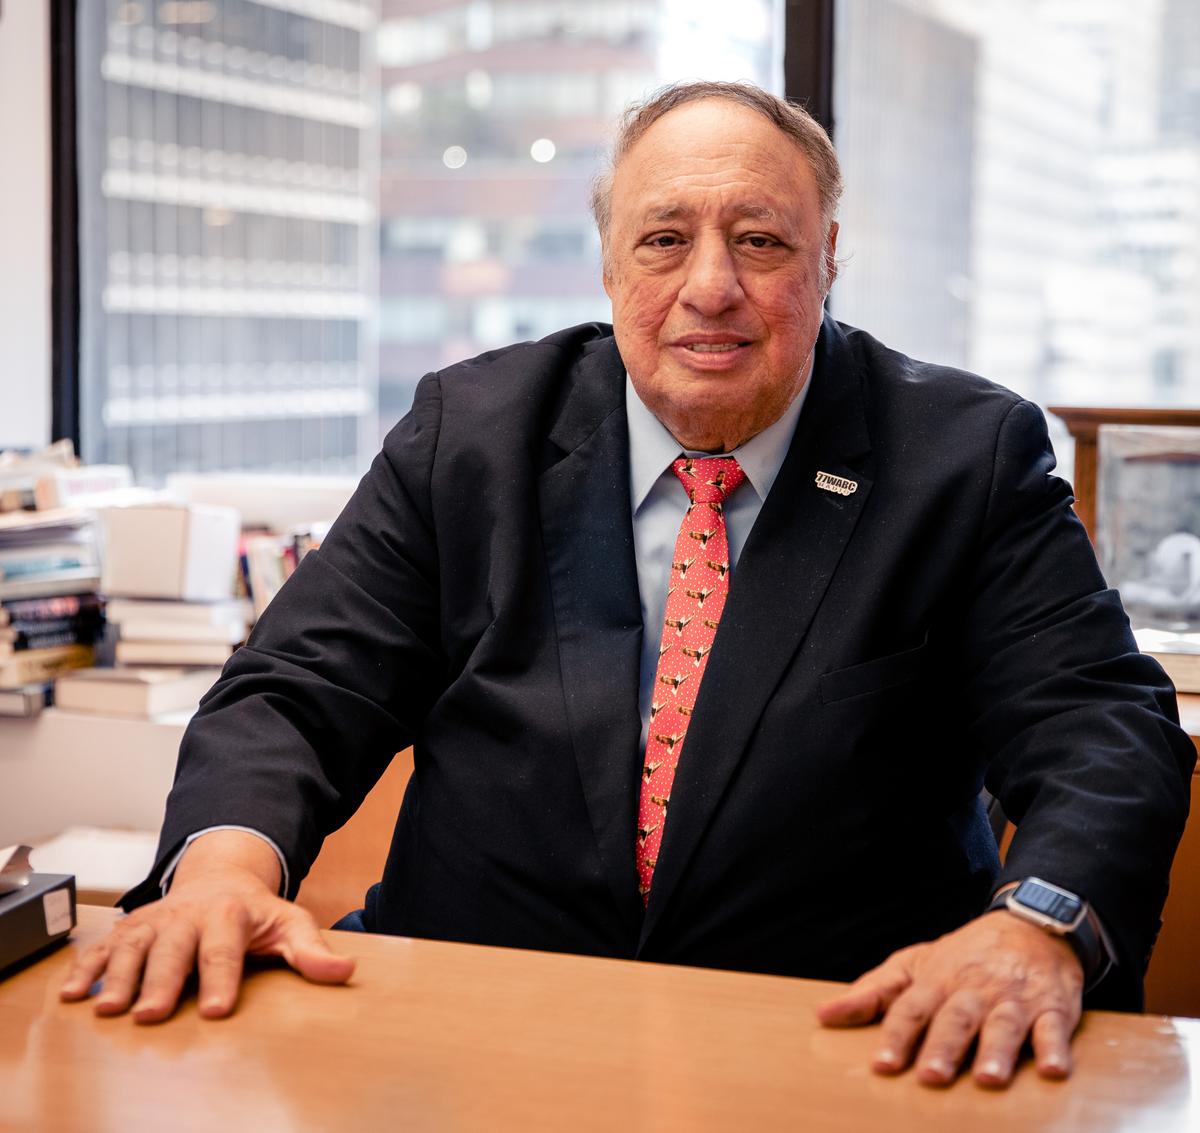 John Catsimatidis, chairman and CEO of Red Apple Group, at his office in New York on Sept. 27, 2022. (Adhiraj Chakrabarti for The Epoch Times)